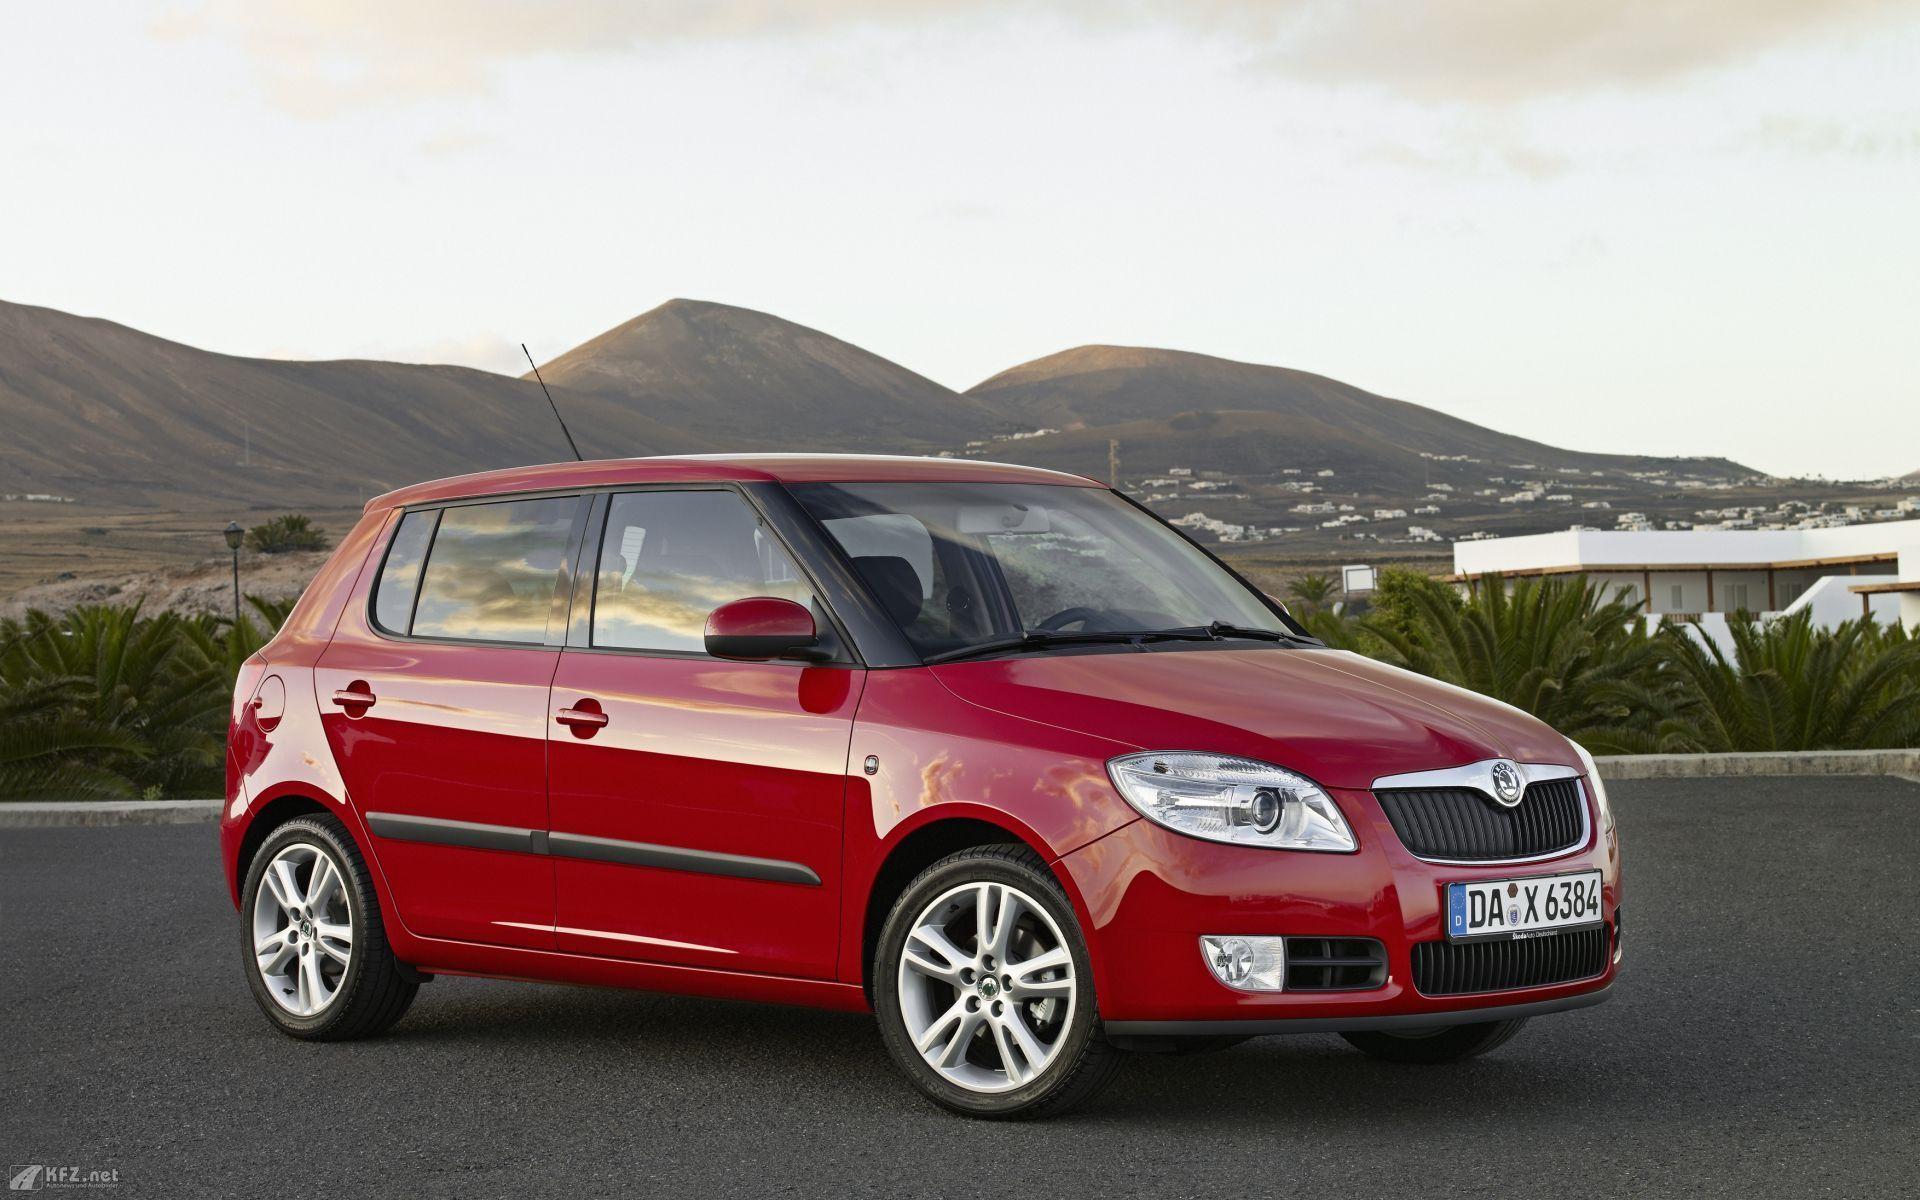 Skoda Fabia Wallpaper HD. Cars in my favourite colours i could